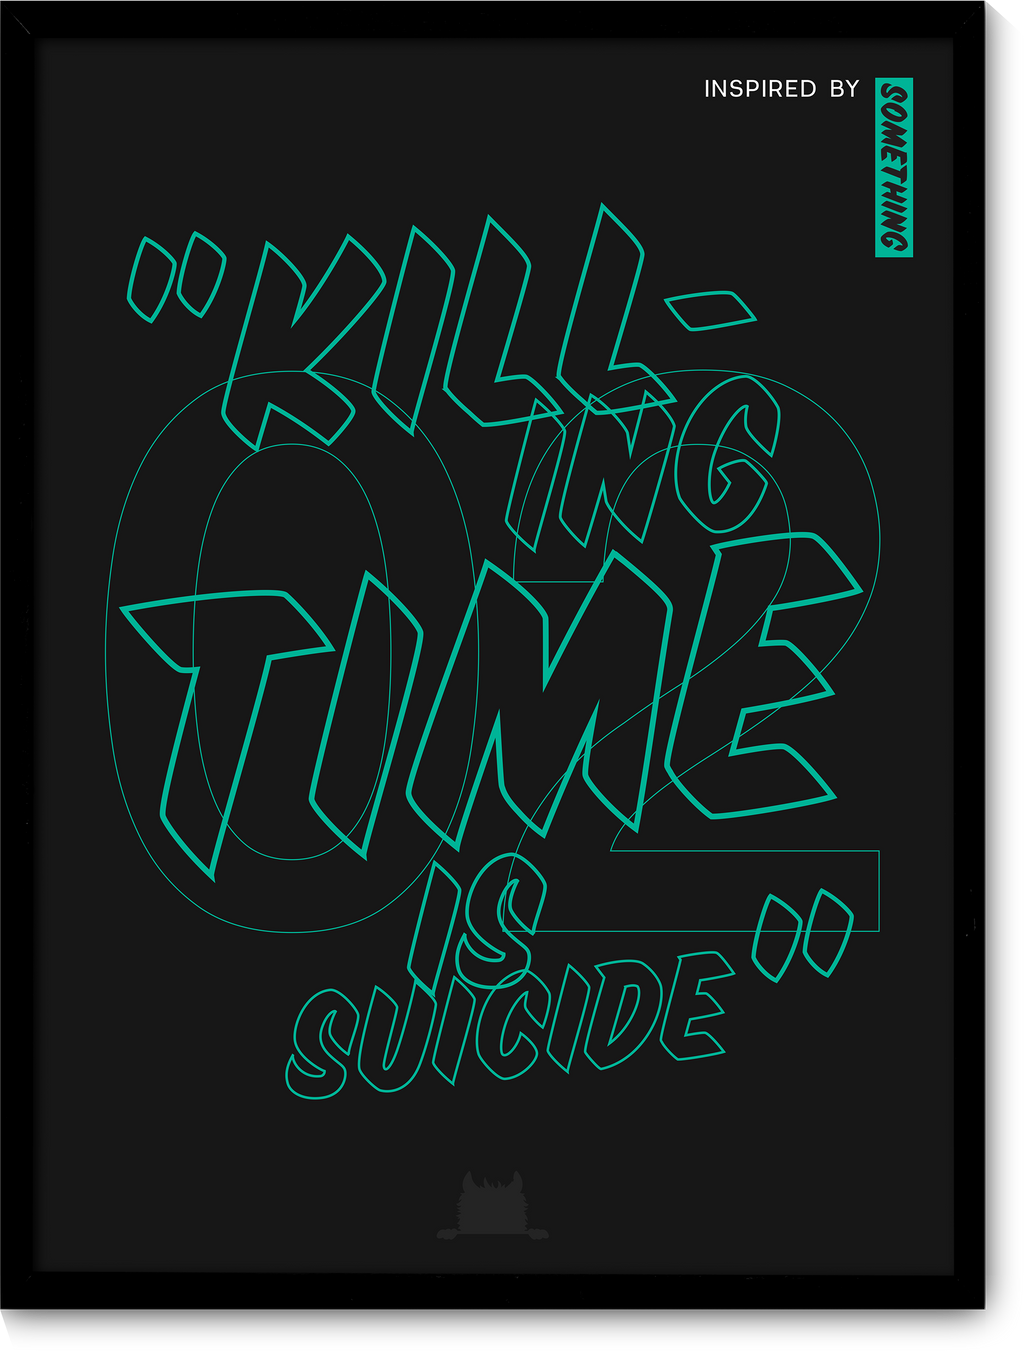 #02 Inspired by some graffiti: "Killing time is suicide."